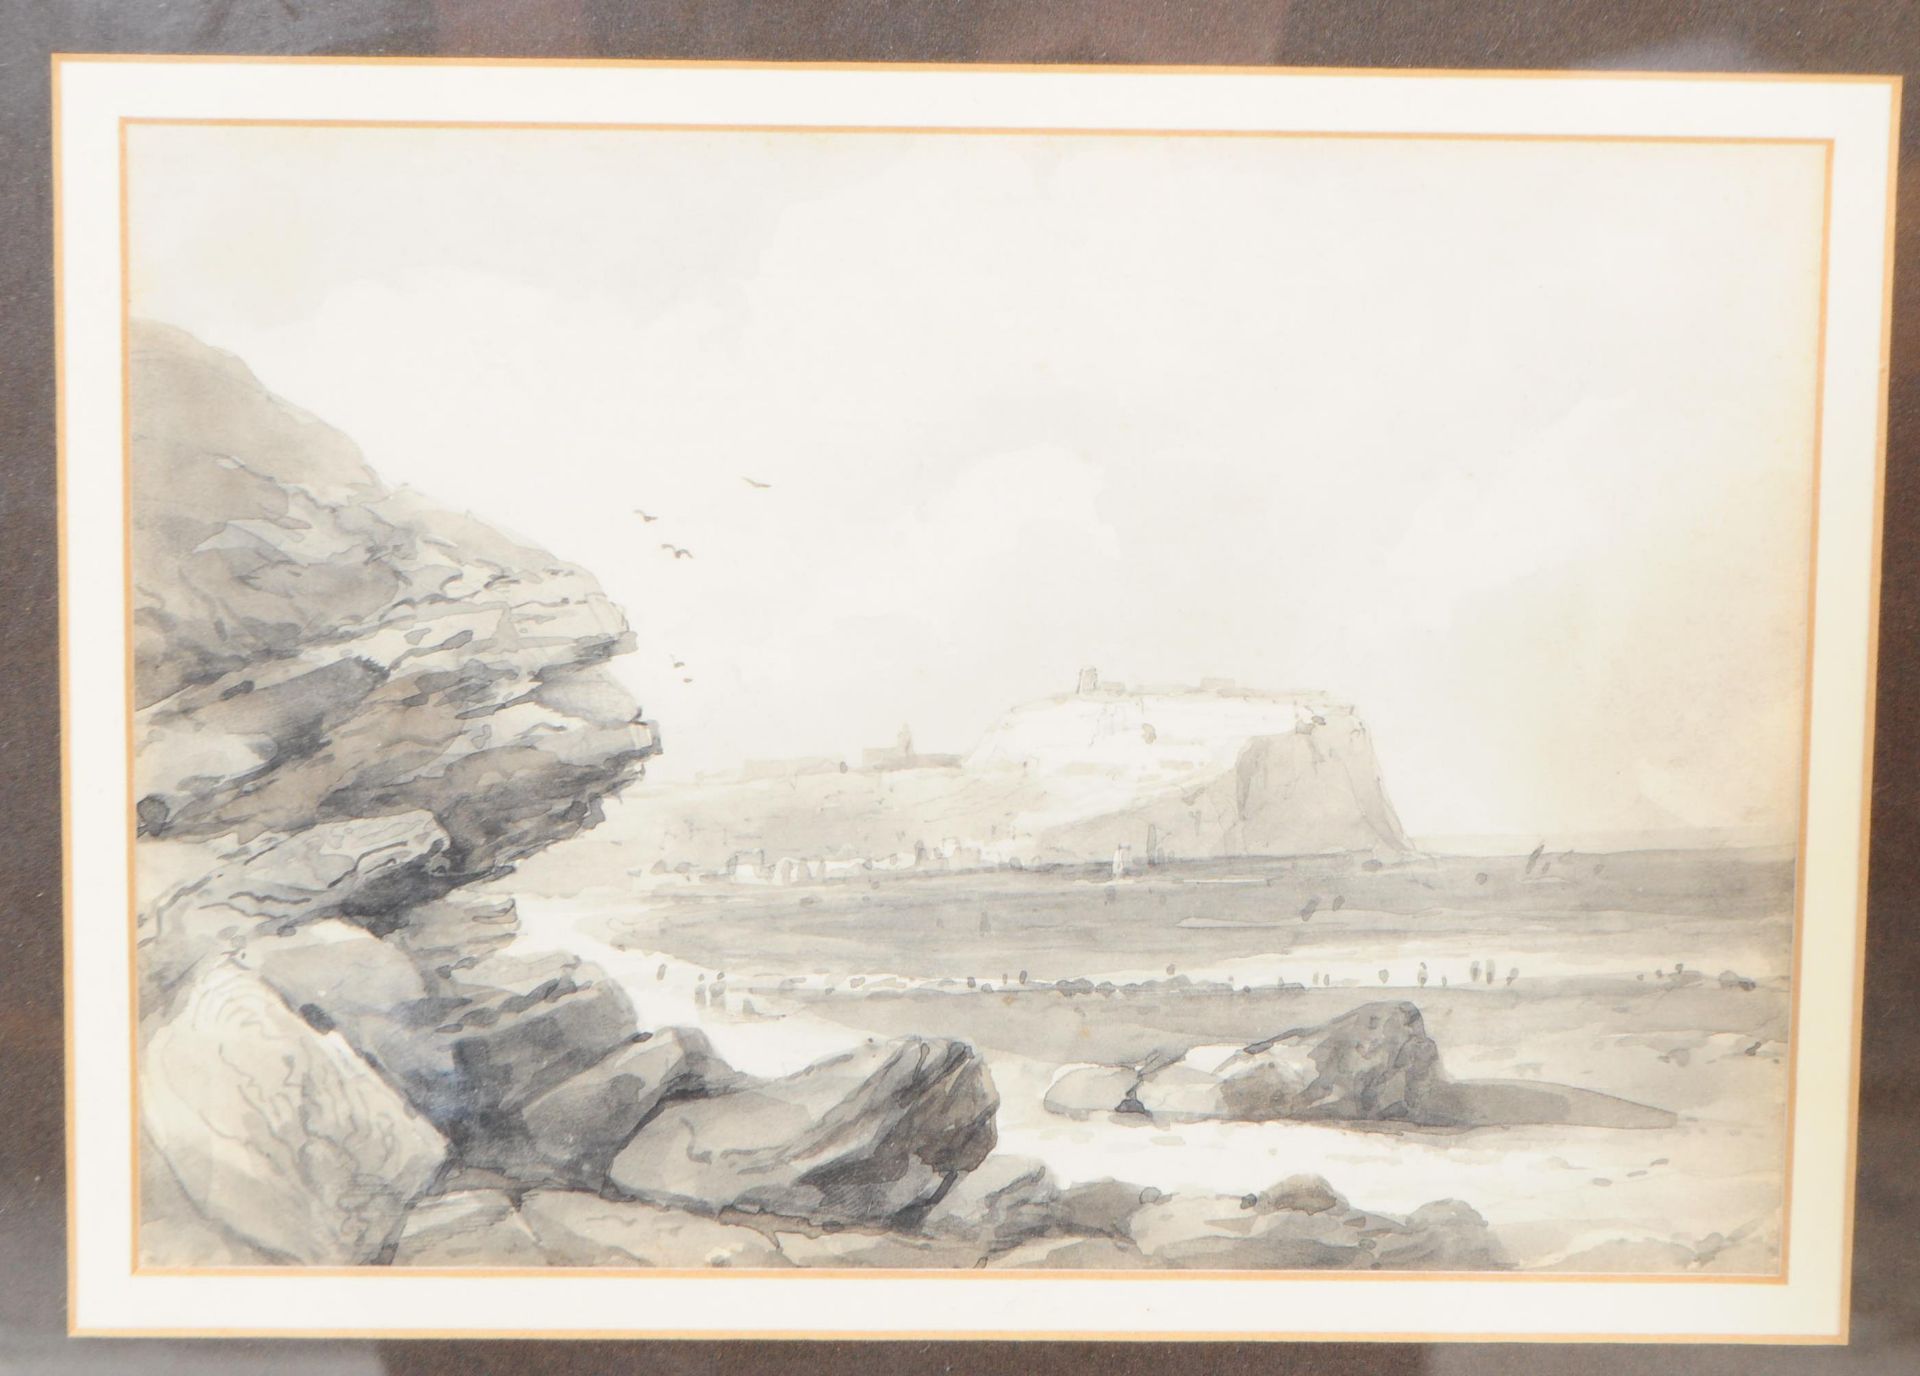 GEORGE RICHARD VAWSER (1800-1888) - WATERCOLOUR ON PAPER - Image 2 of 3